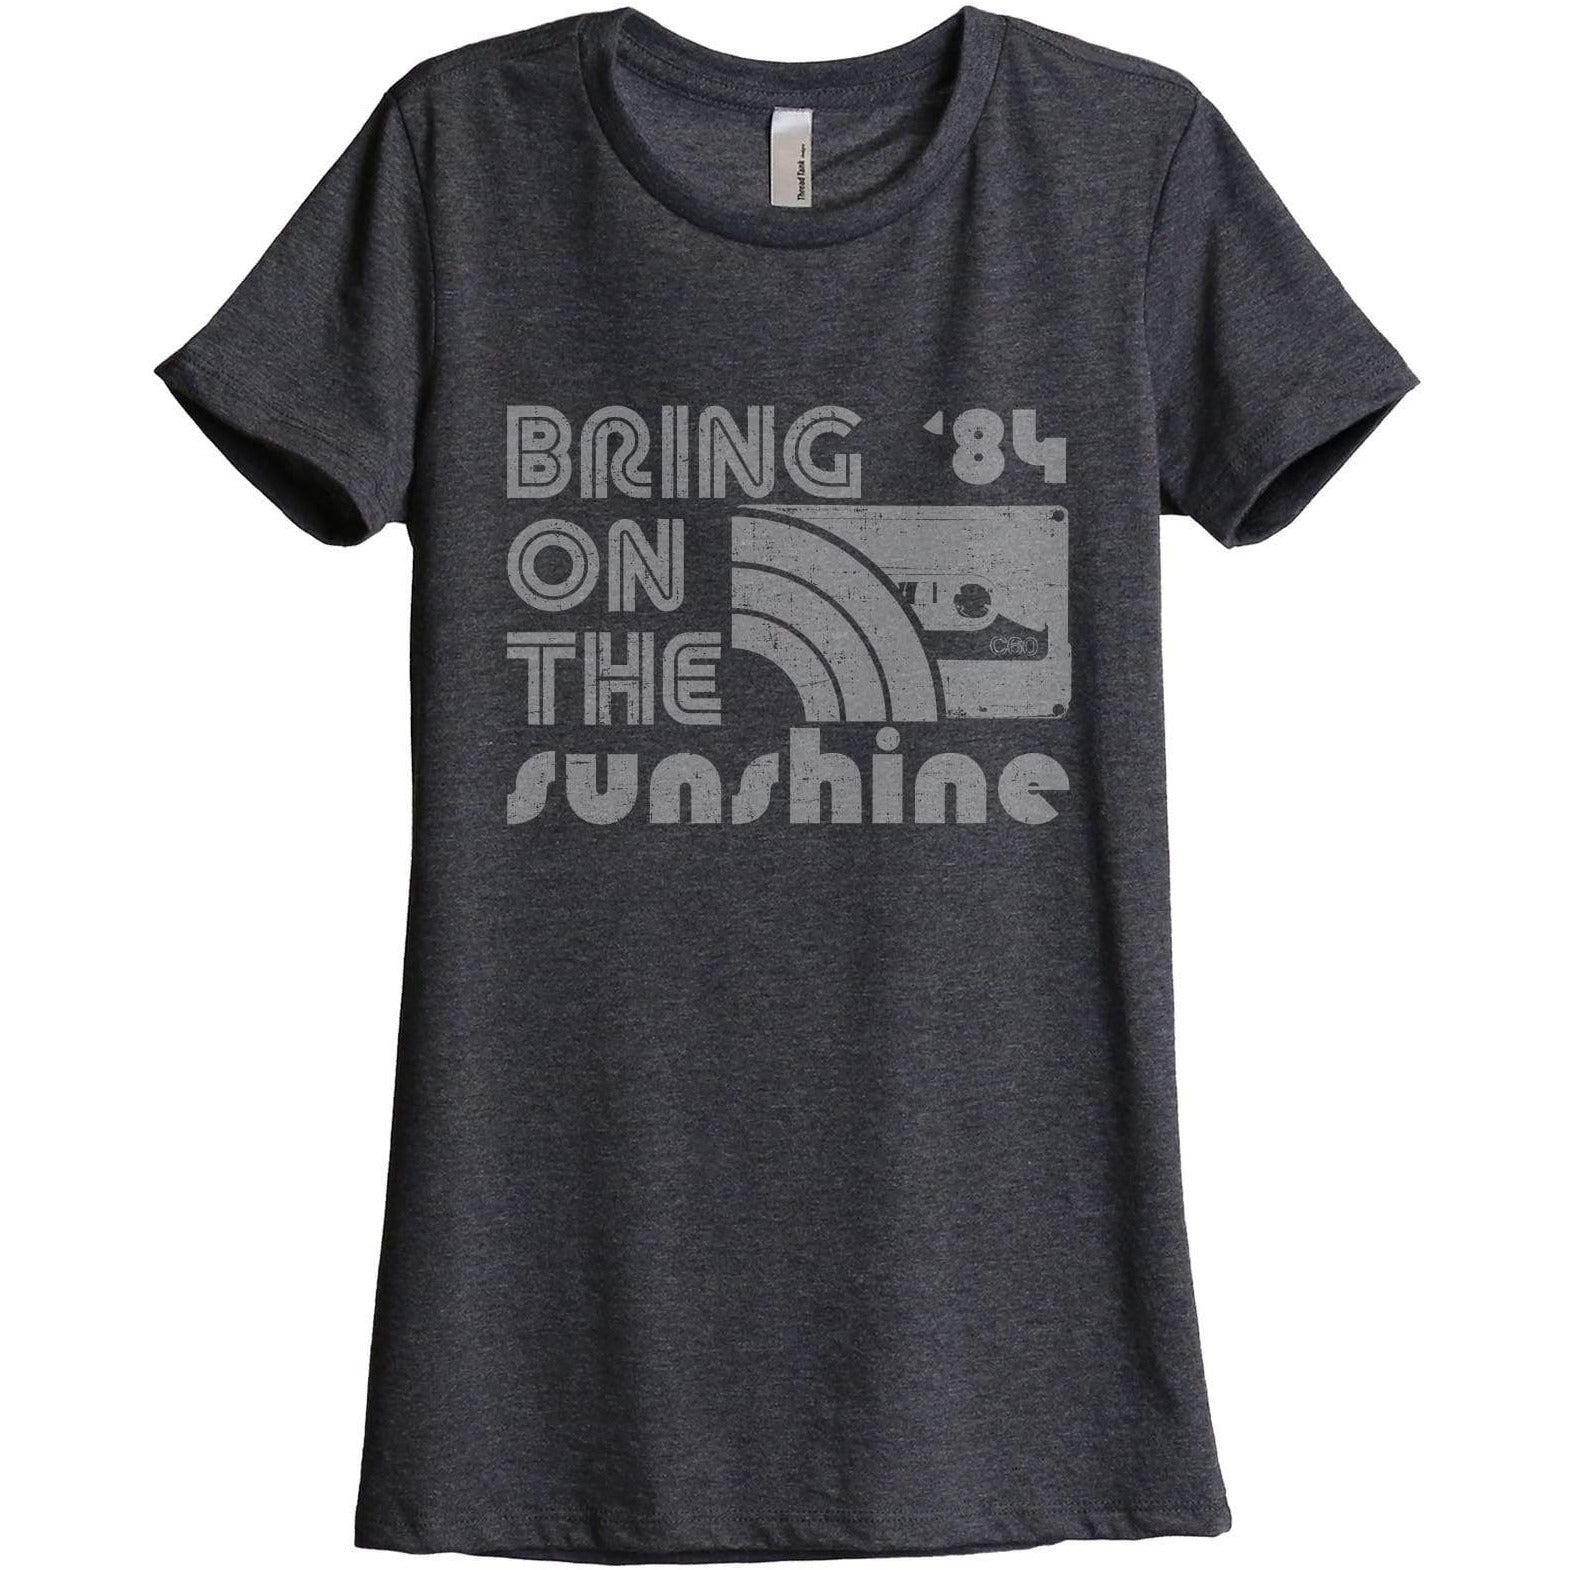 Bring On The Sunshine - Thread Tank | Stories You Can Wear | T-Shirts, Tank Tops and Sweatshirts